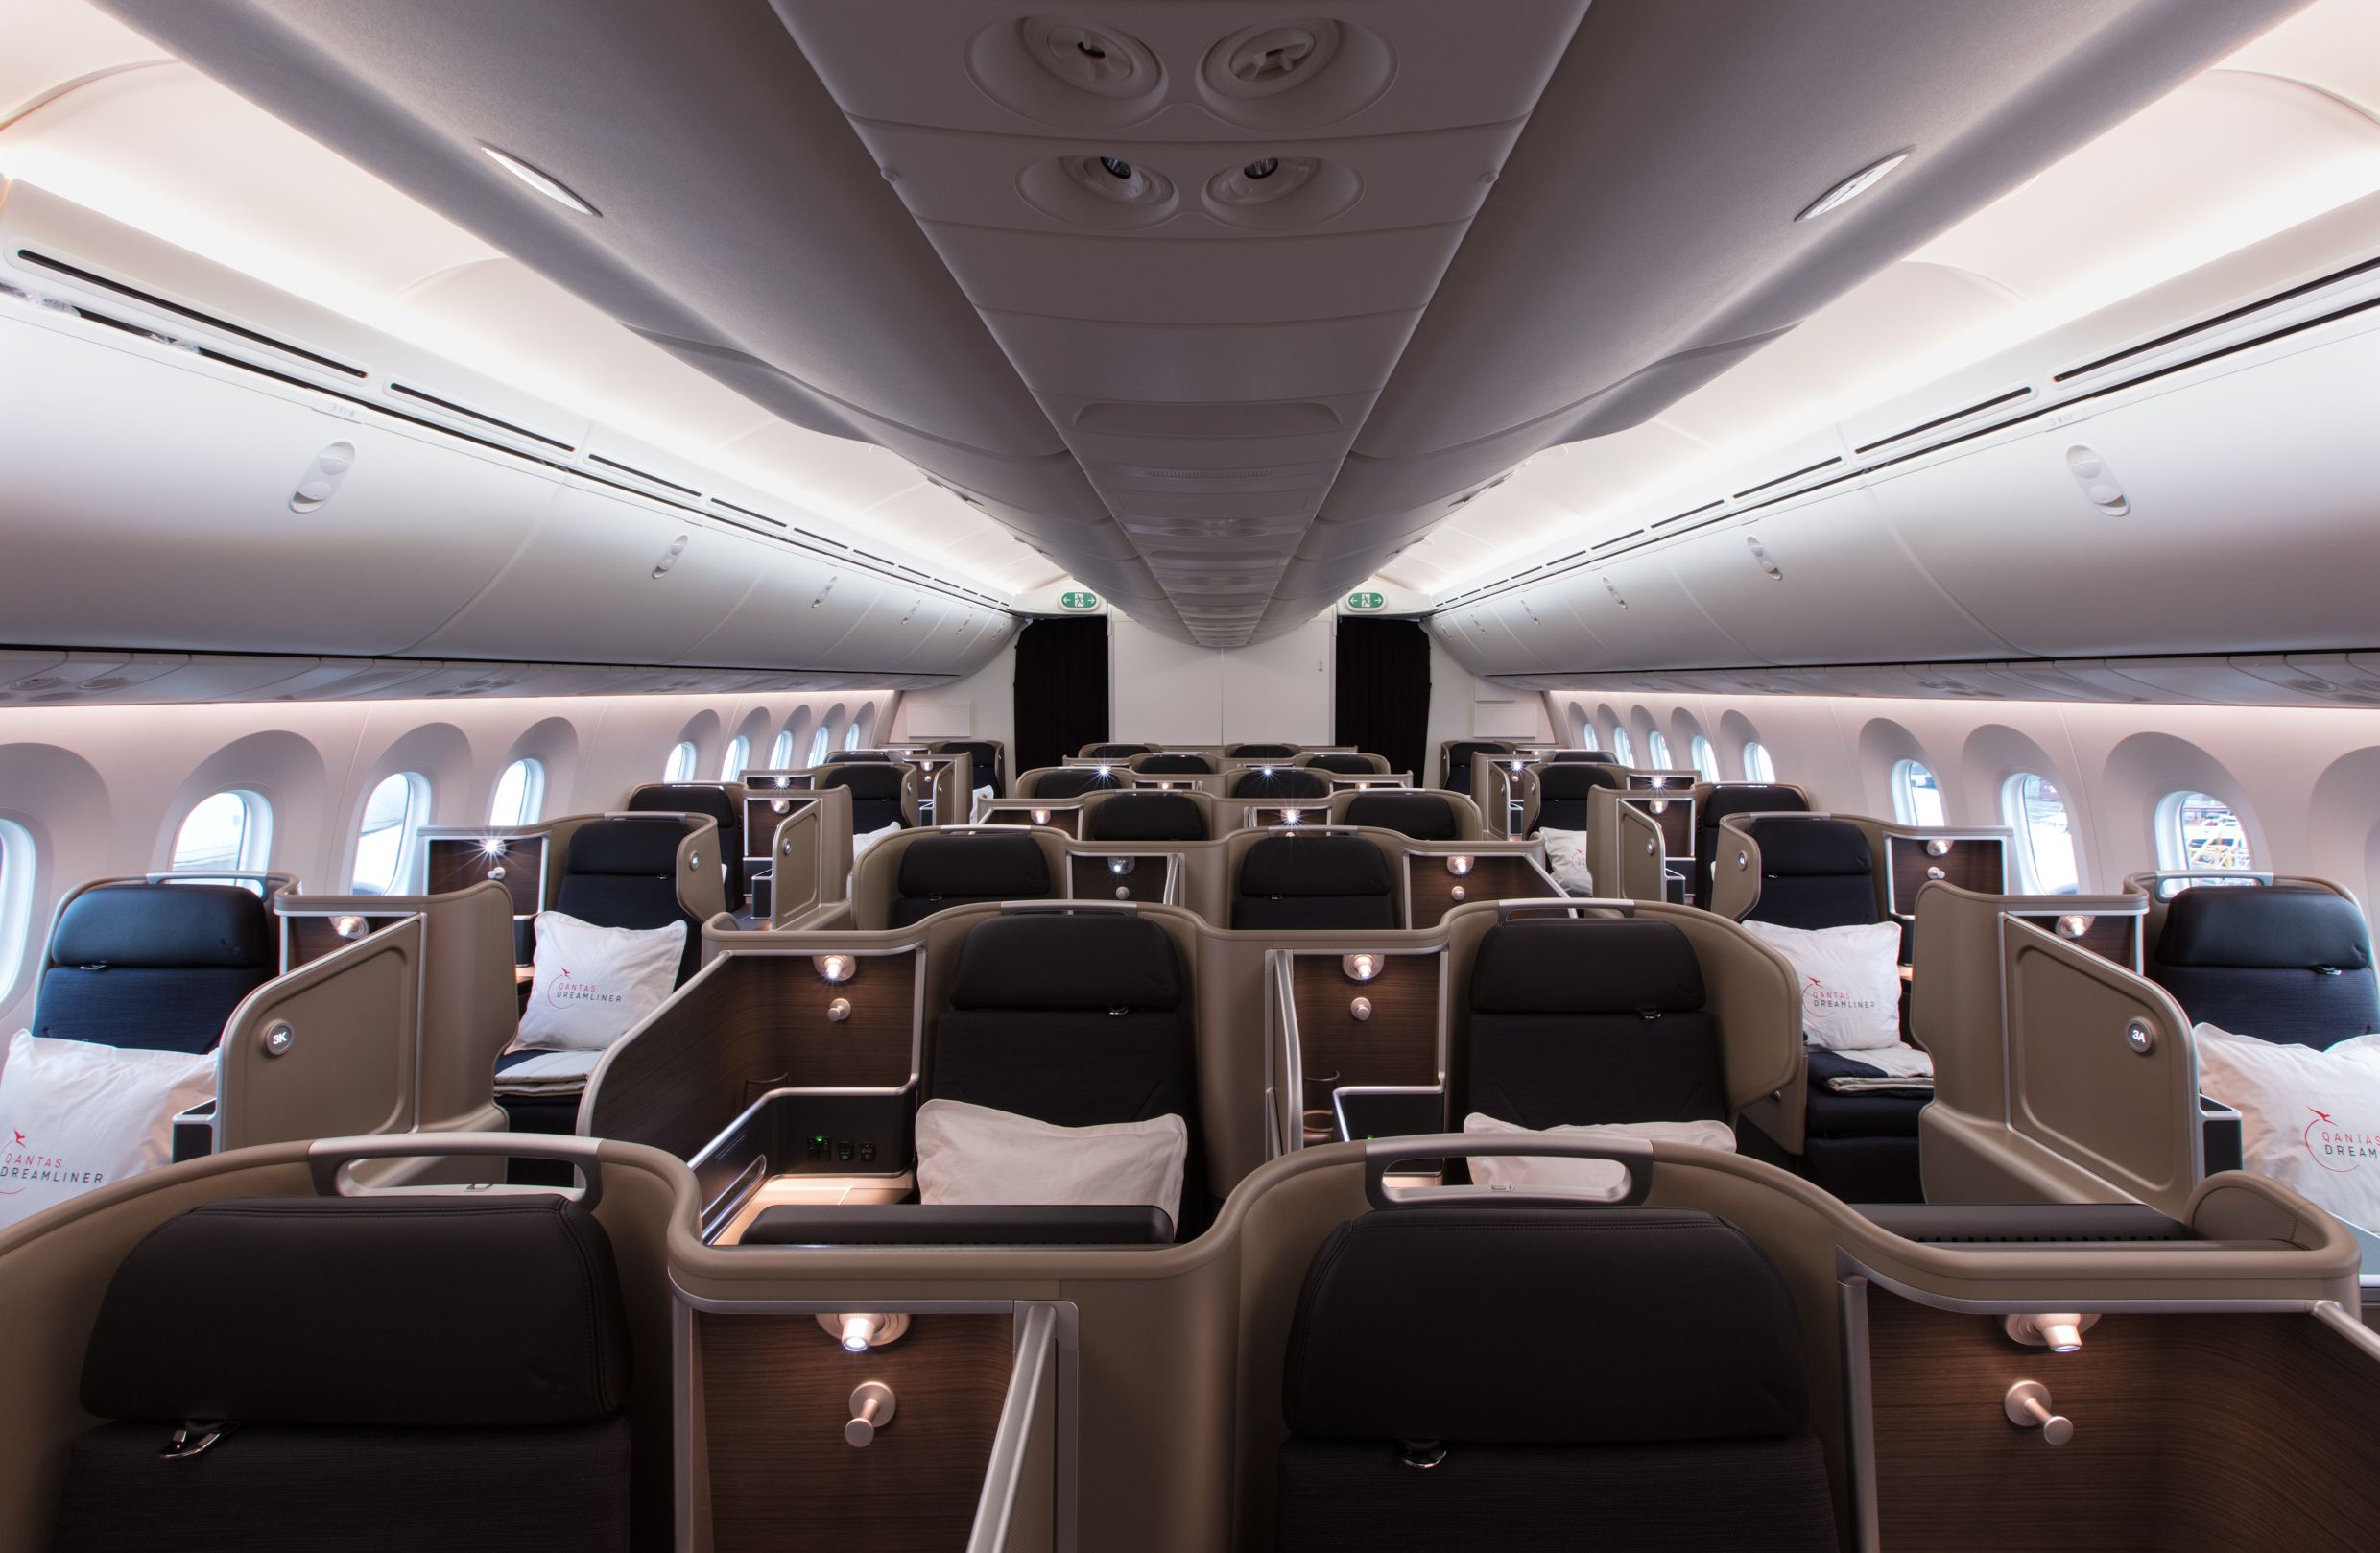 Inside the business class cabin of a Qantas Boeing 787-9.